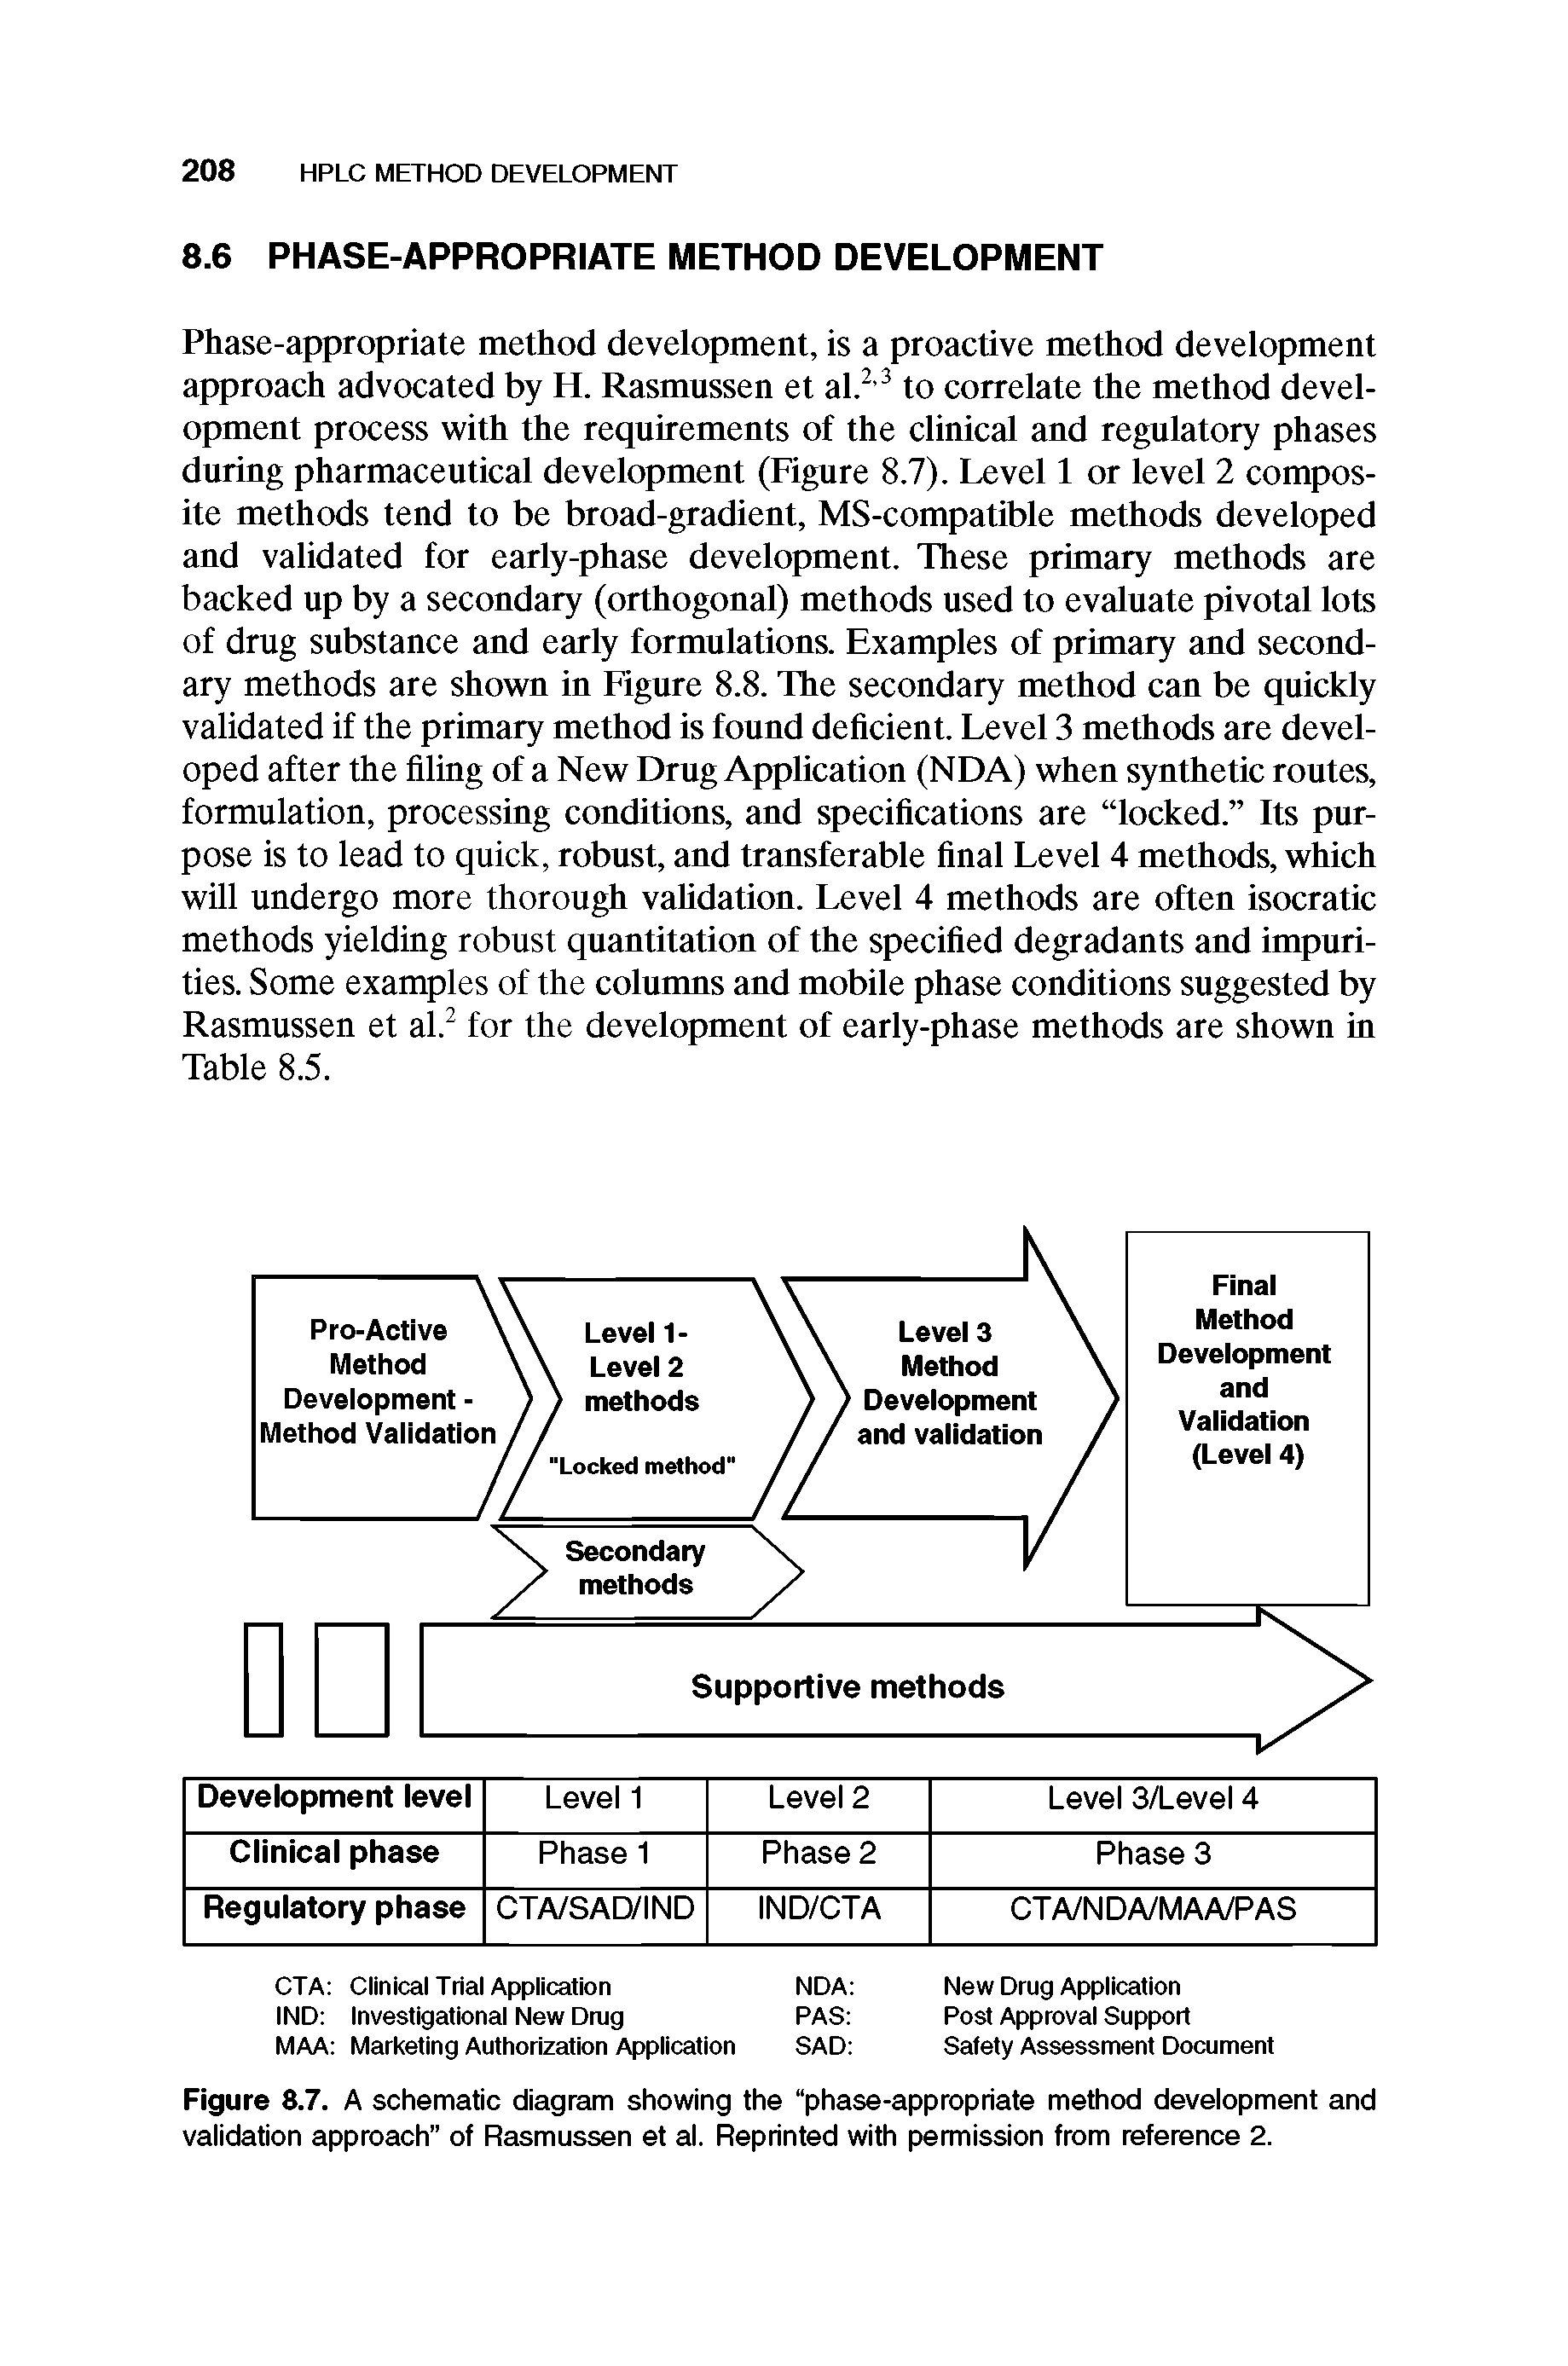 Figure 8.7. A schematic diagram showing the phase-appropriate method development and validation approach of Rasmussen et al. Reprinted with permission from reference 2.